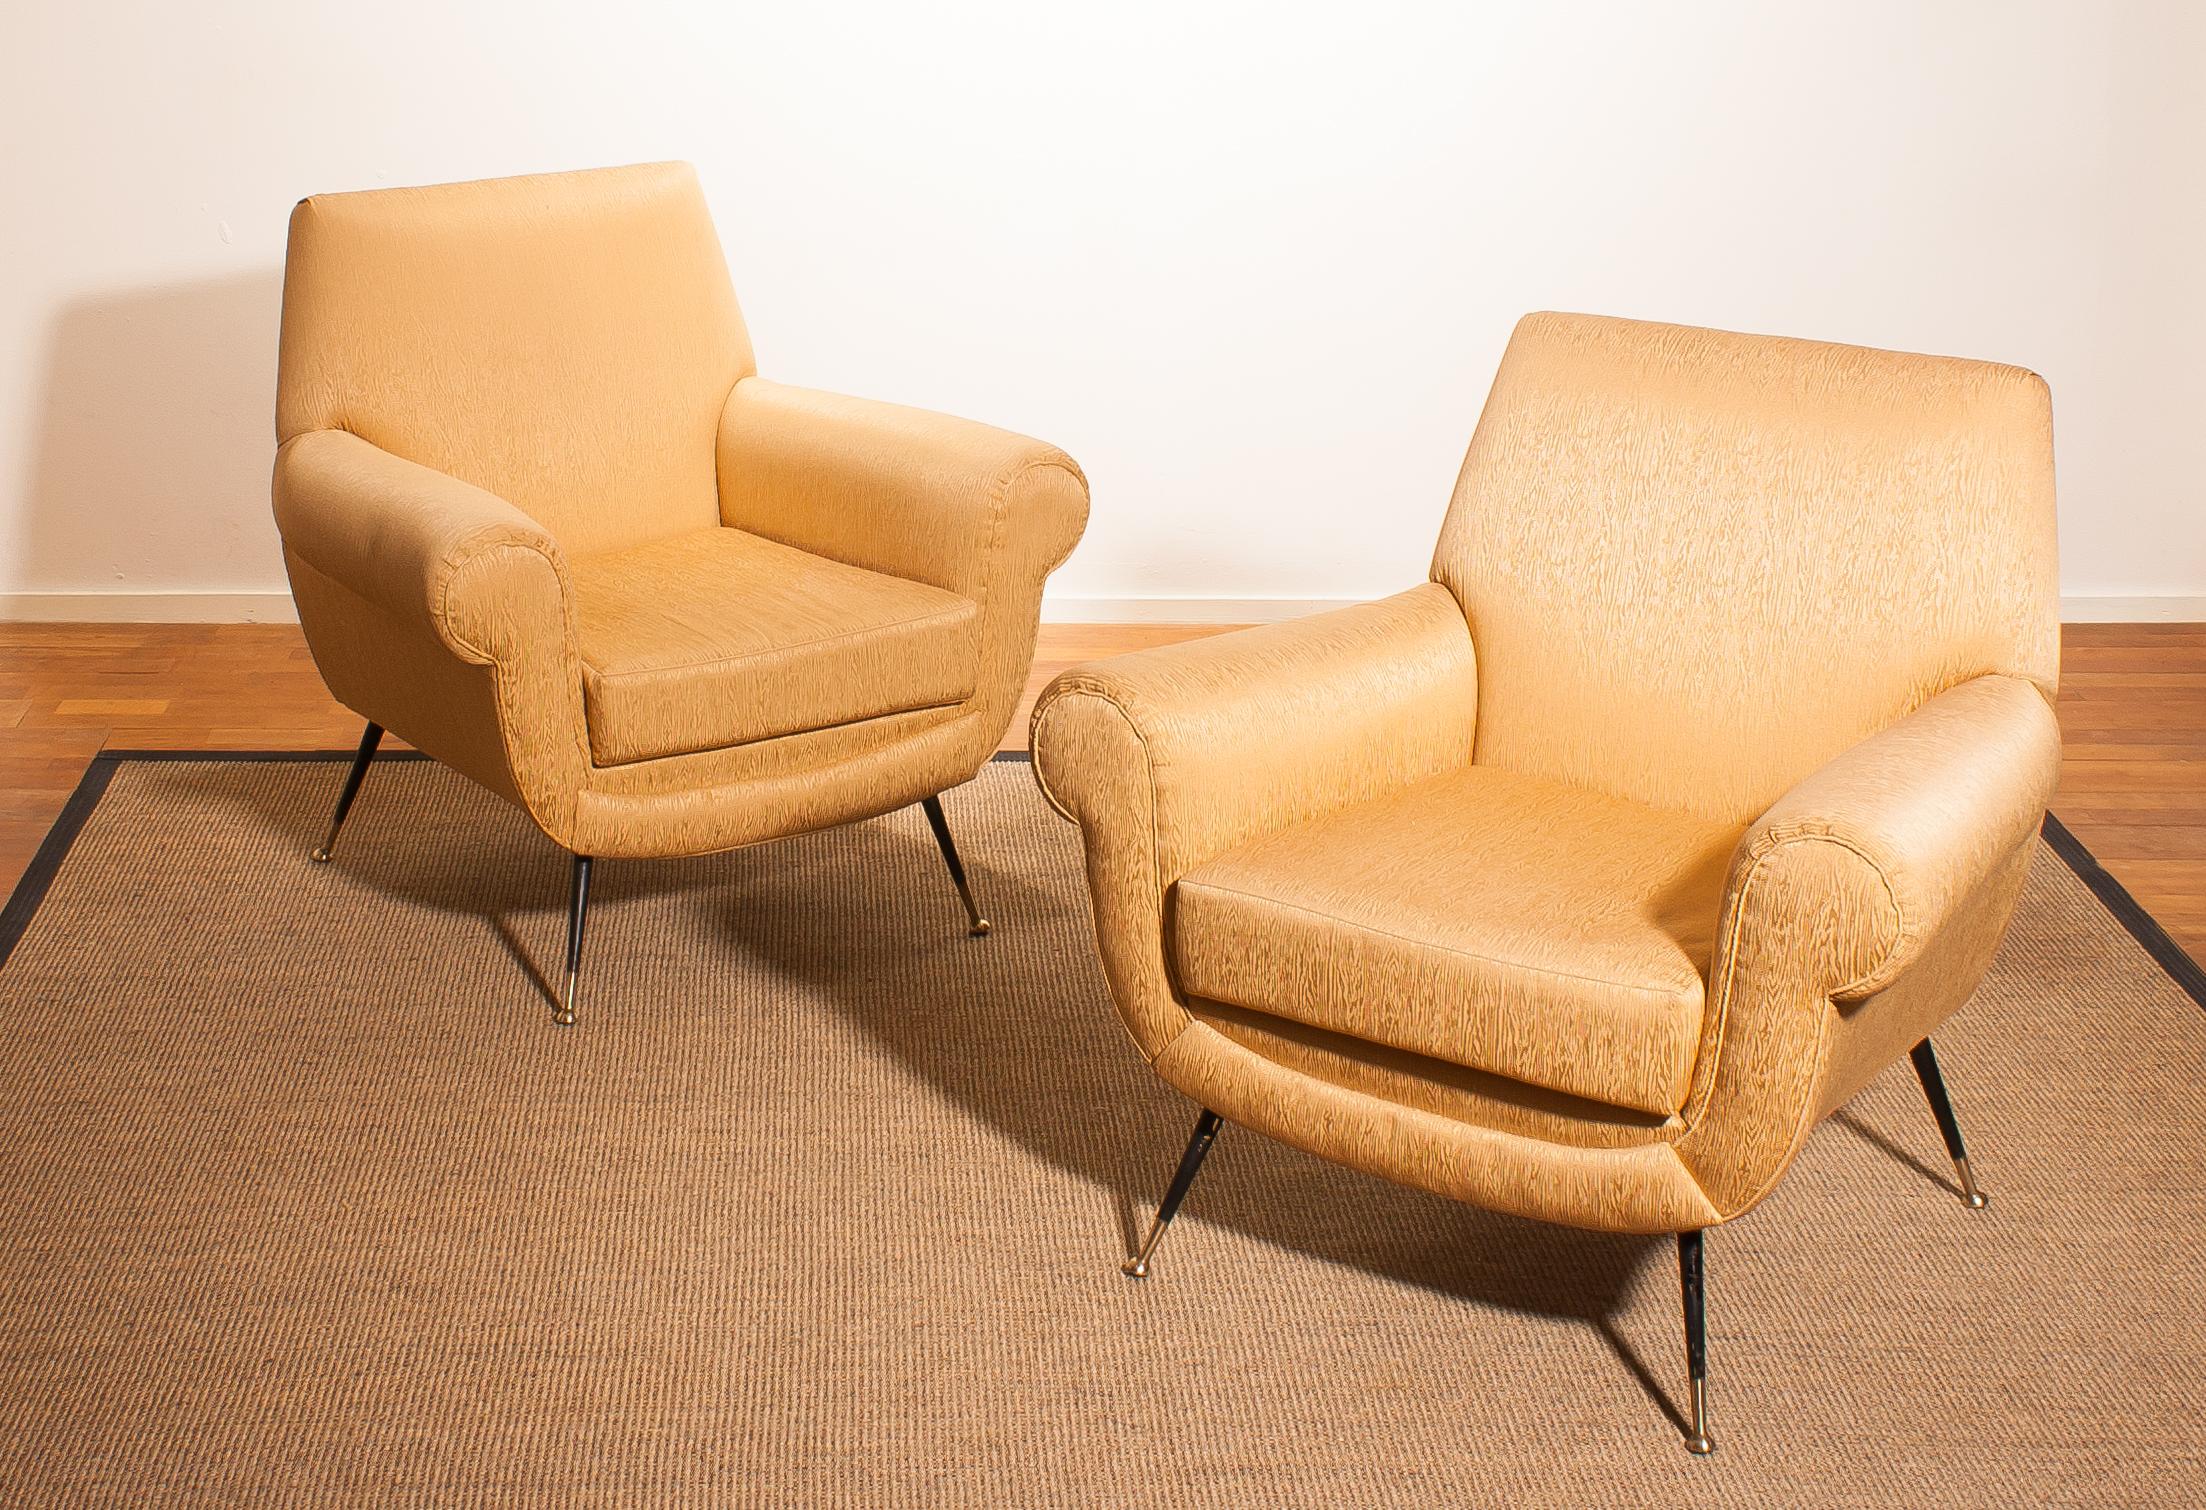 1950s, Brass and Golden Jacquard Set Lounge Chairs by Gigi Radice for Minotti 7